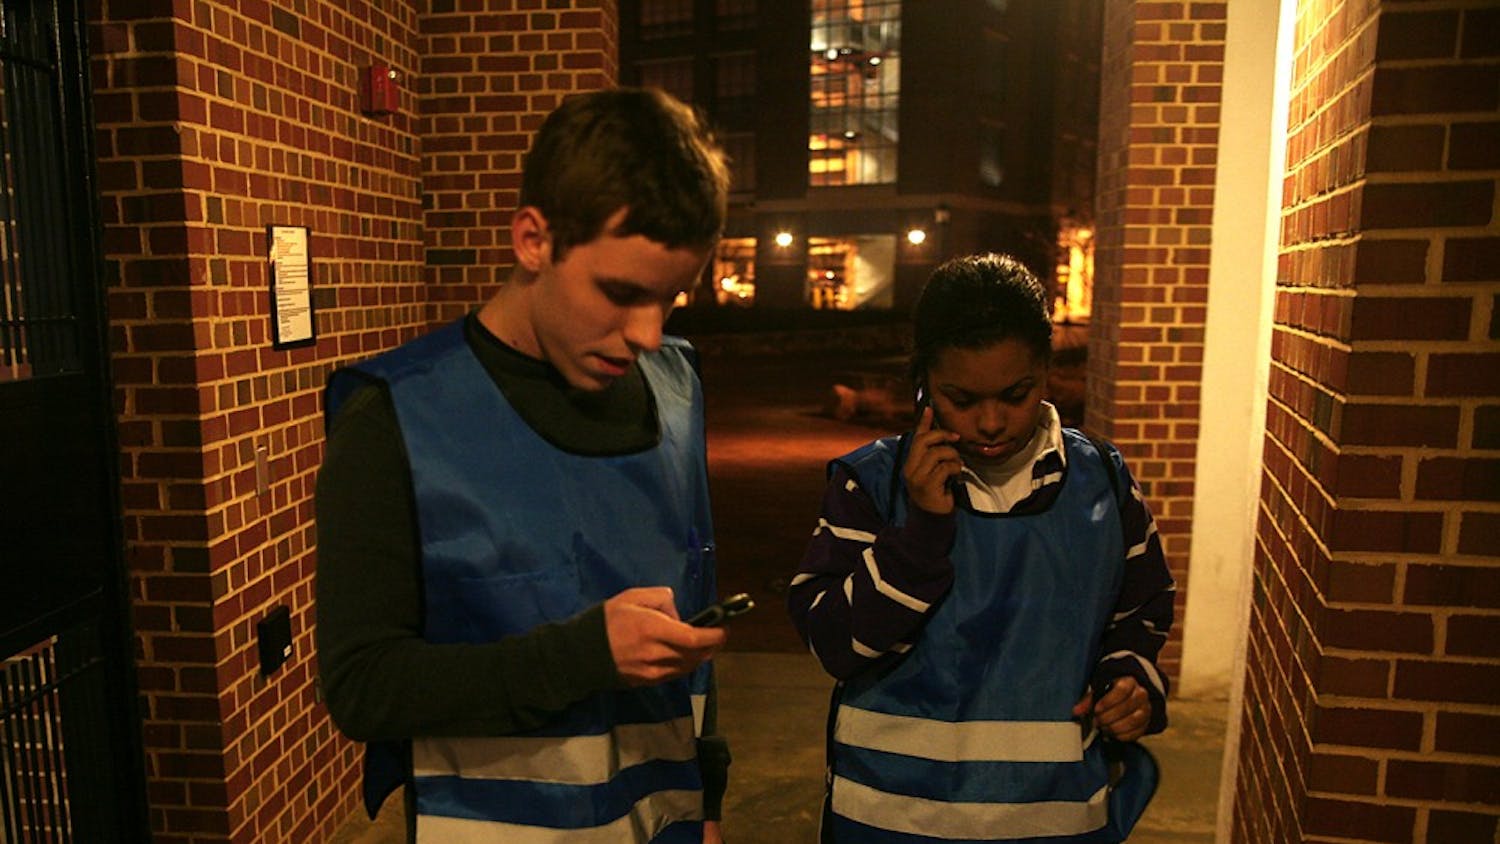 McKinney Brown, left, and Ariel Eure call the SafeWalk dispatcher on January 19, 2010.